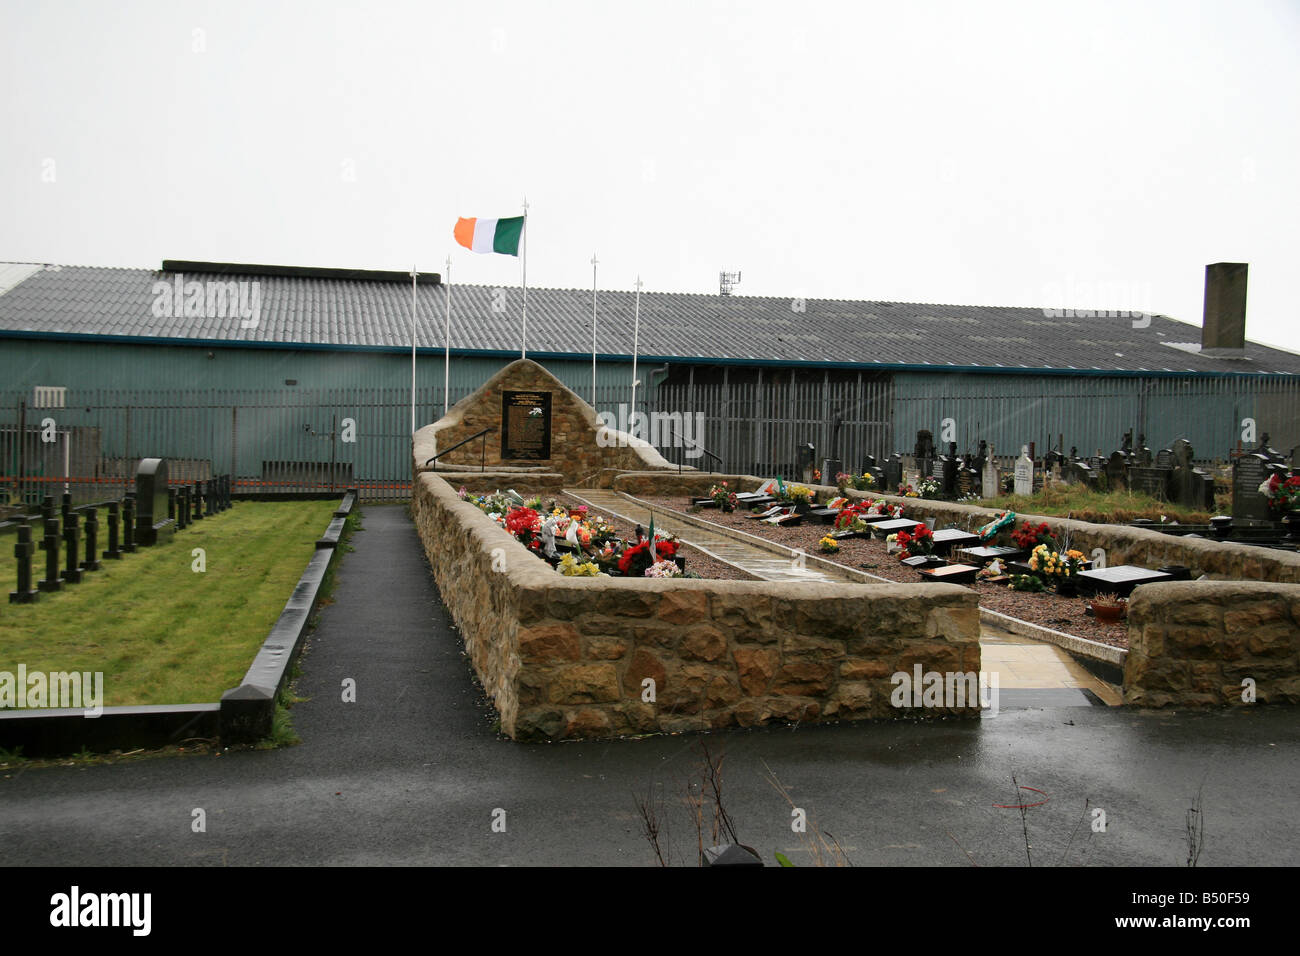 The Republican Plot in the Catholic Milltown Cemetery, Falls Road, Belfast on a rain and wind swept winter afternoon. Stock Photo